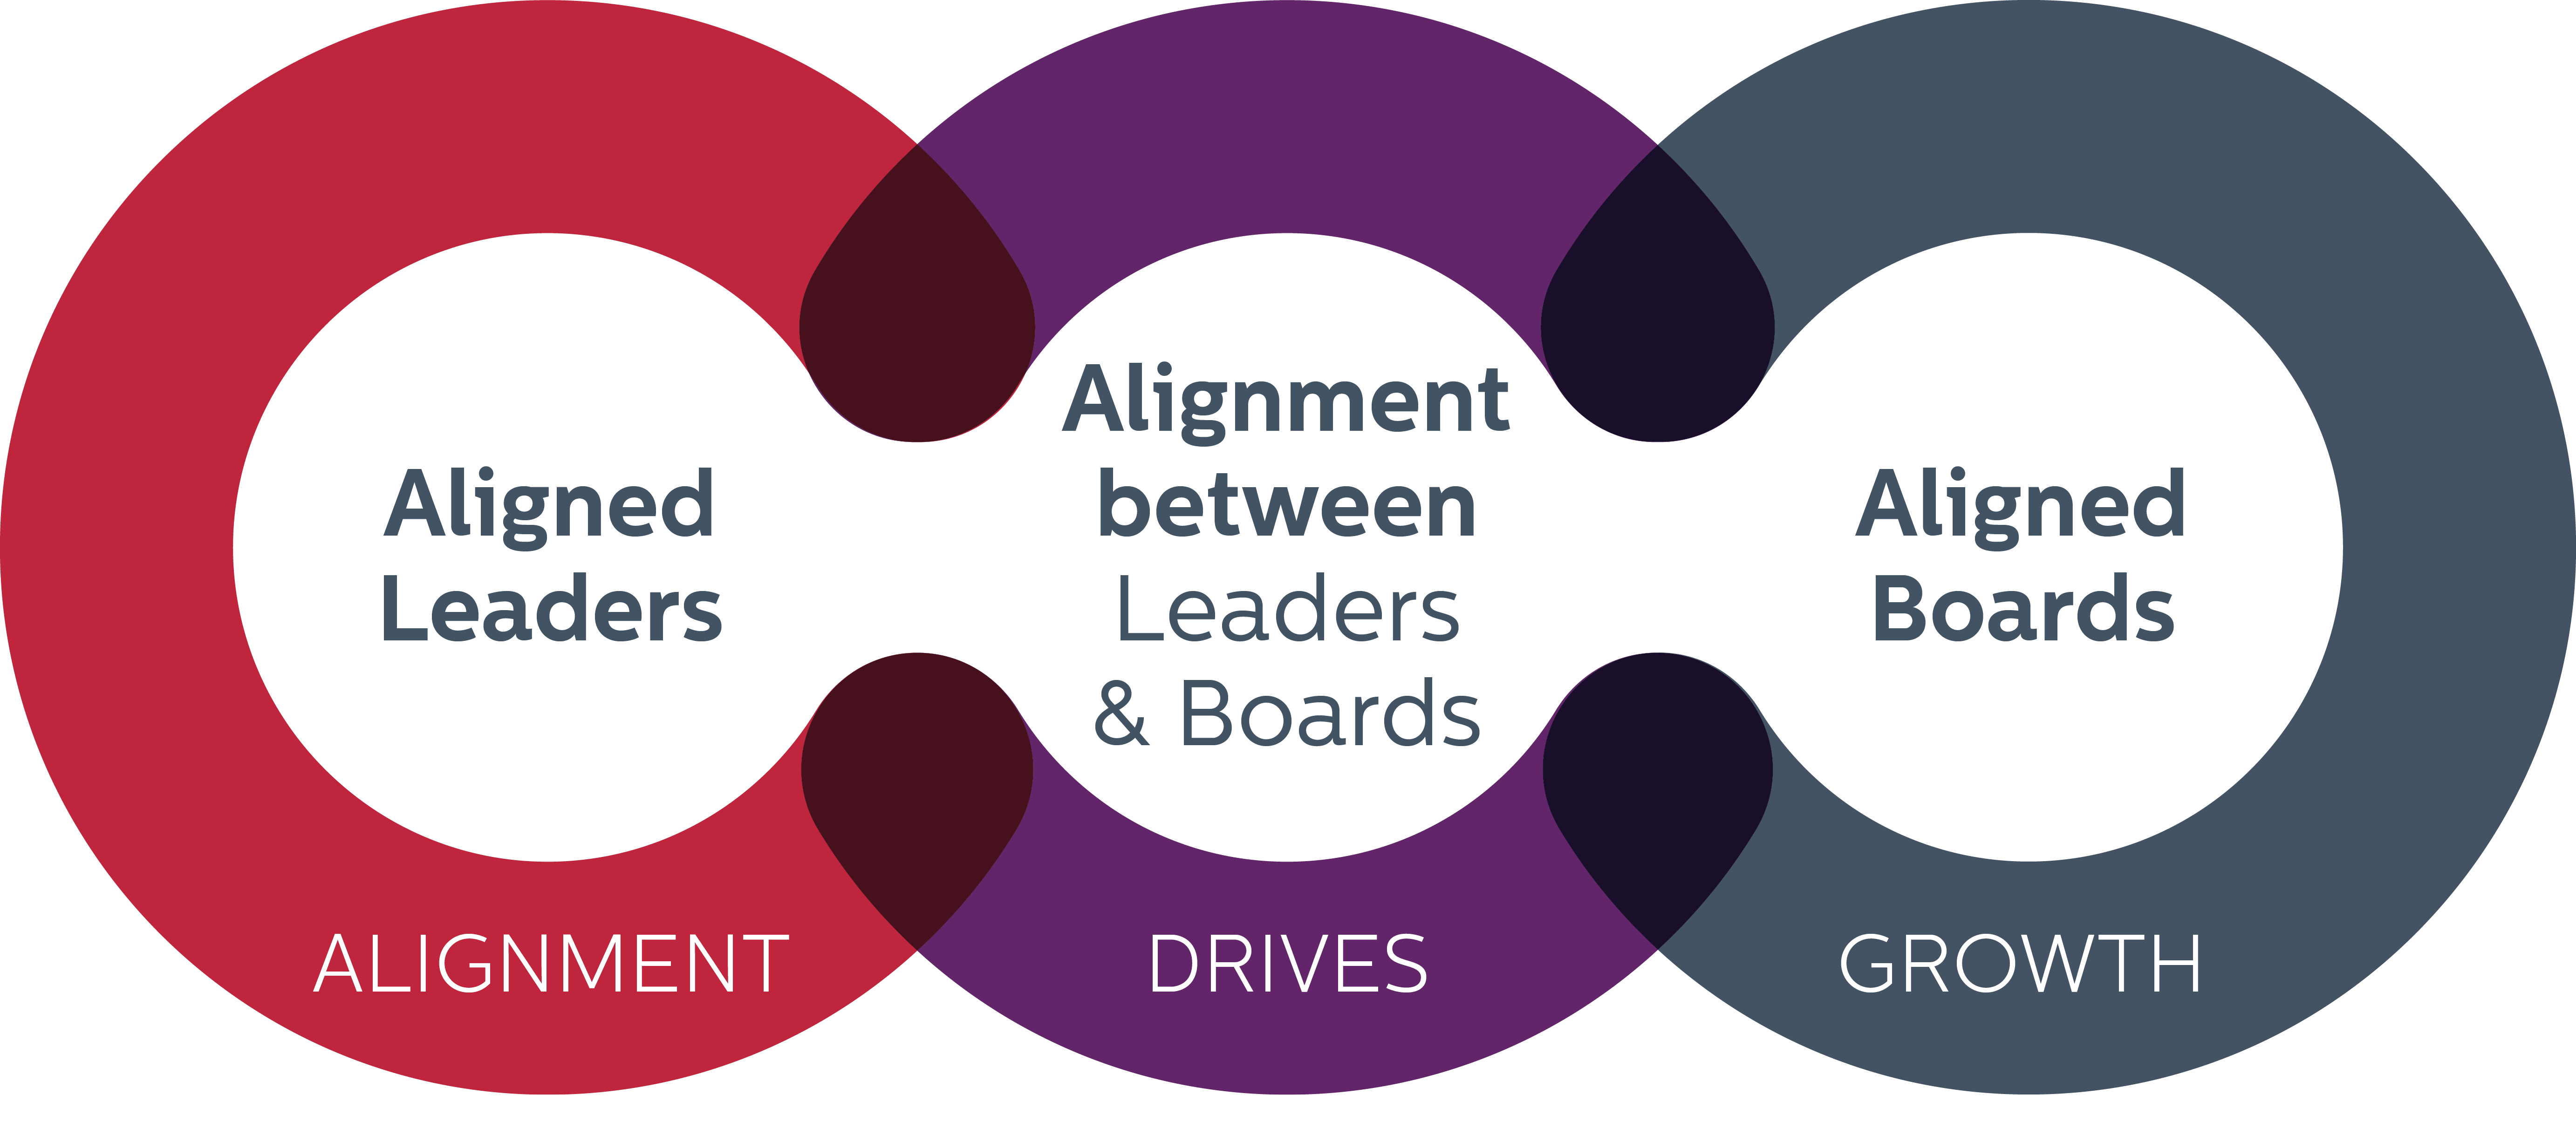 Graphic about alignment driving growth